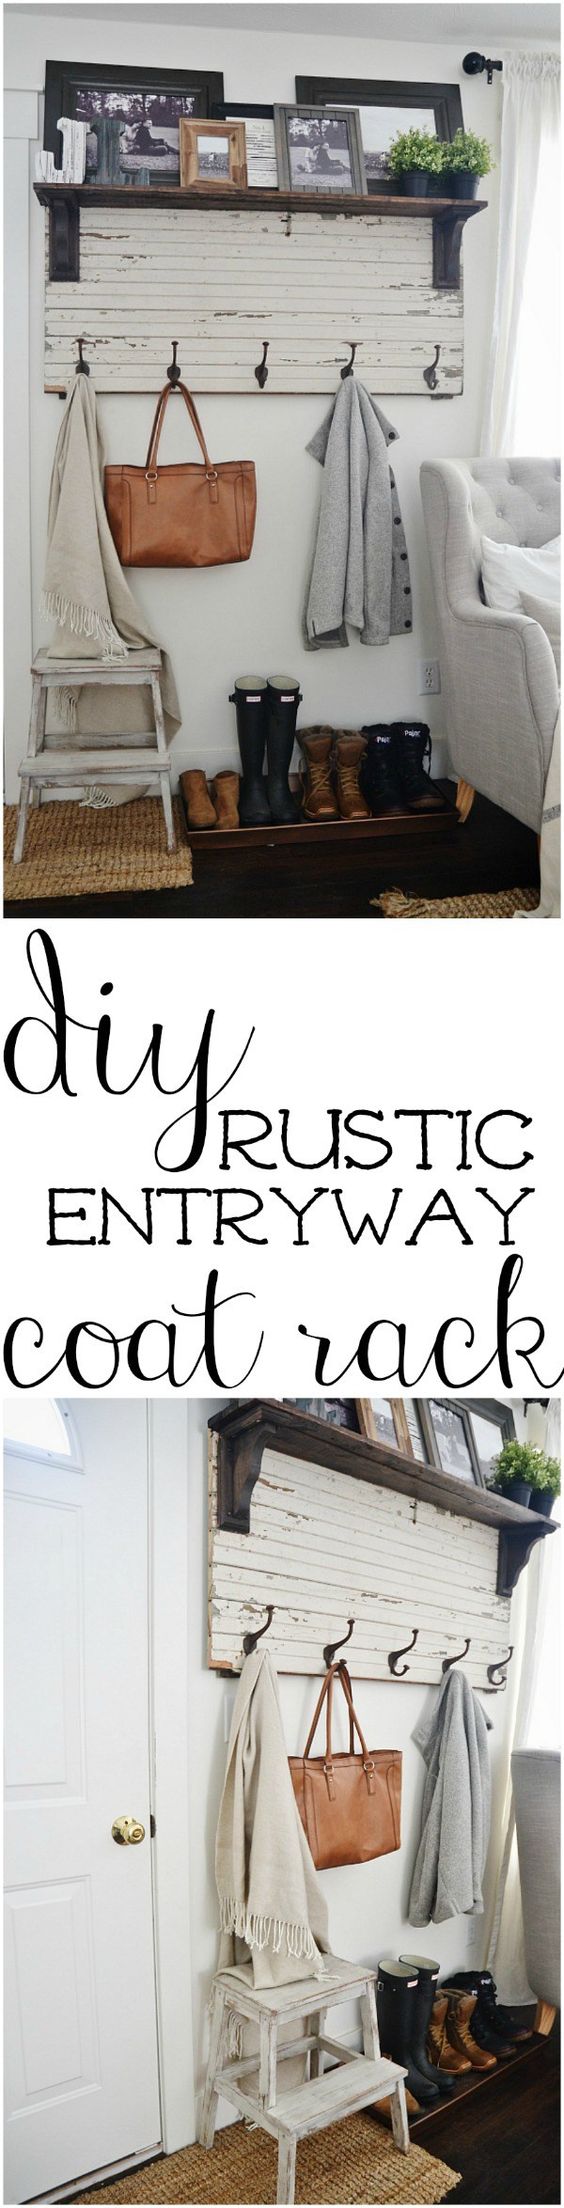 DIY rustic entryway coat rack - A super simple way to create organization in any size entryway or mud room! A must pin!